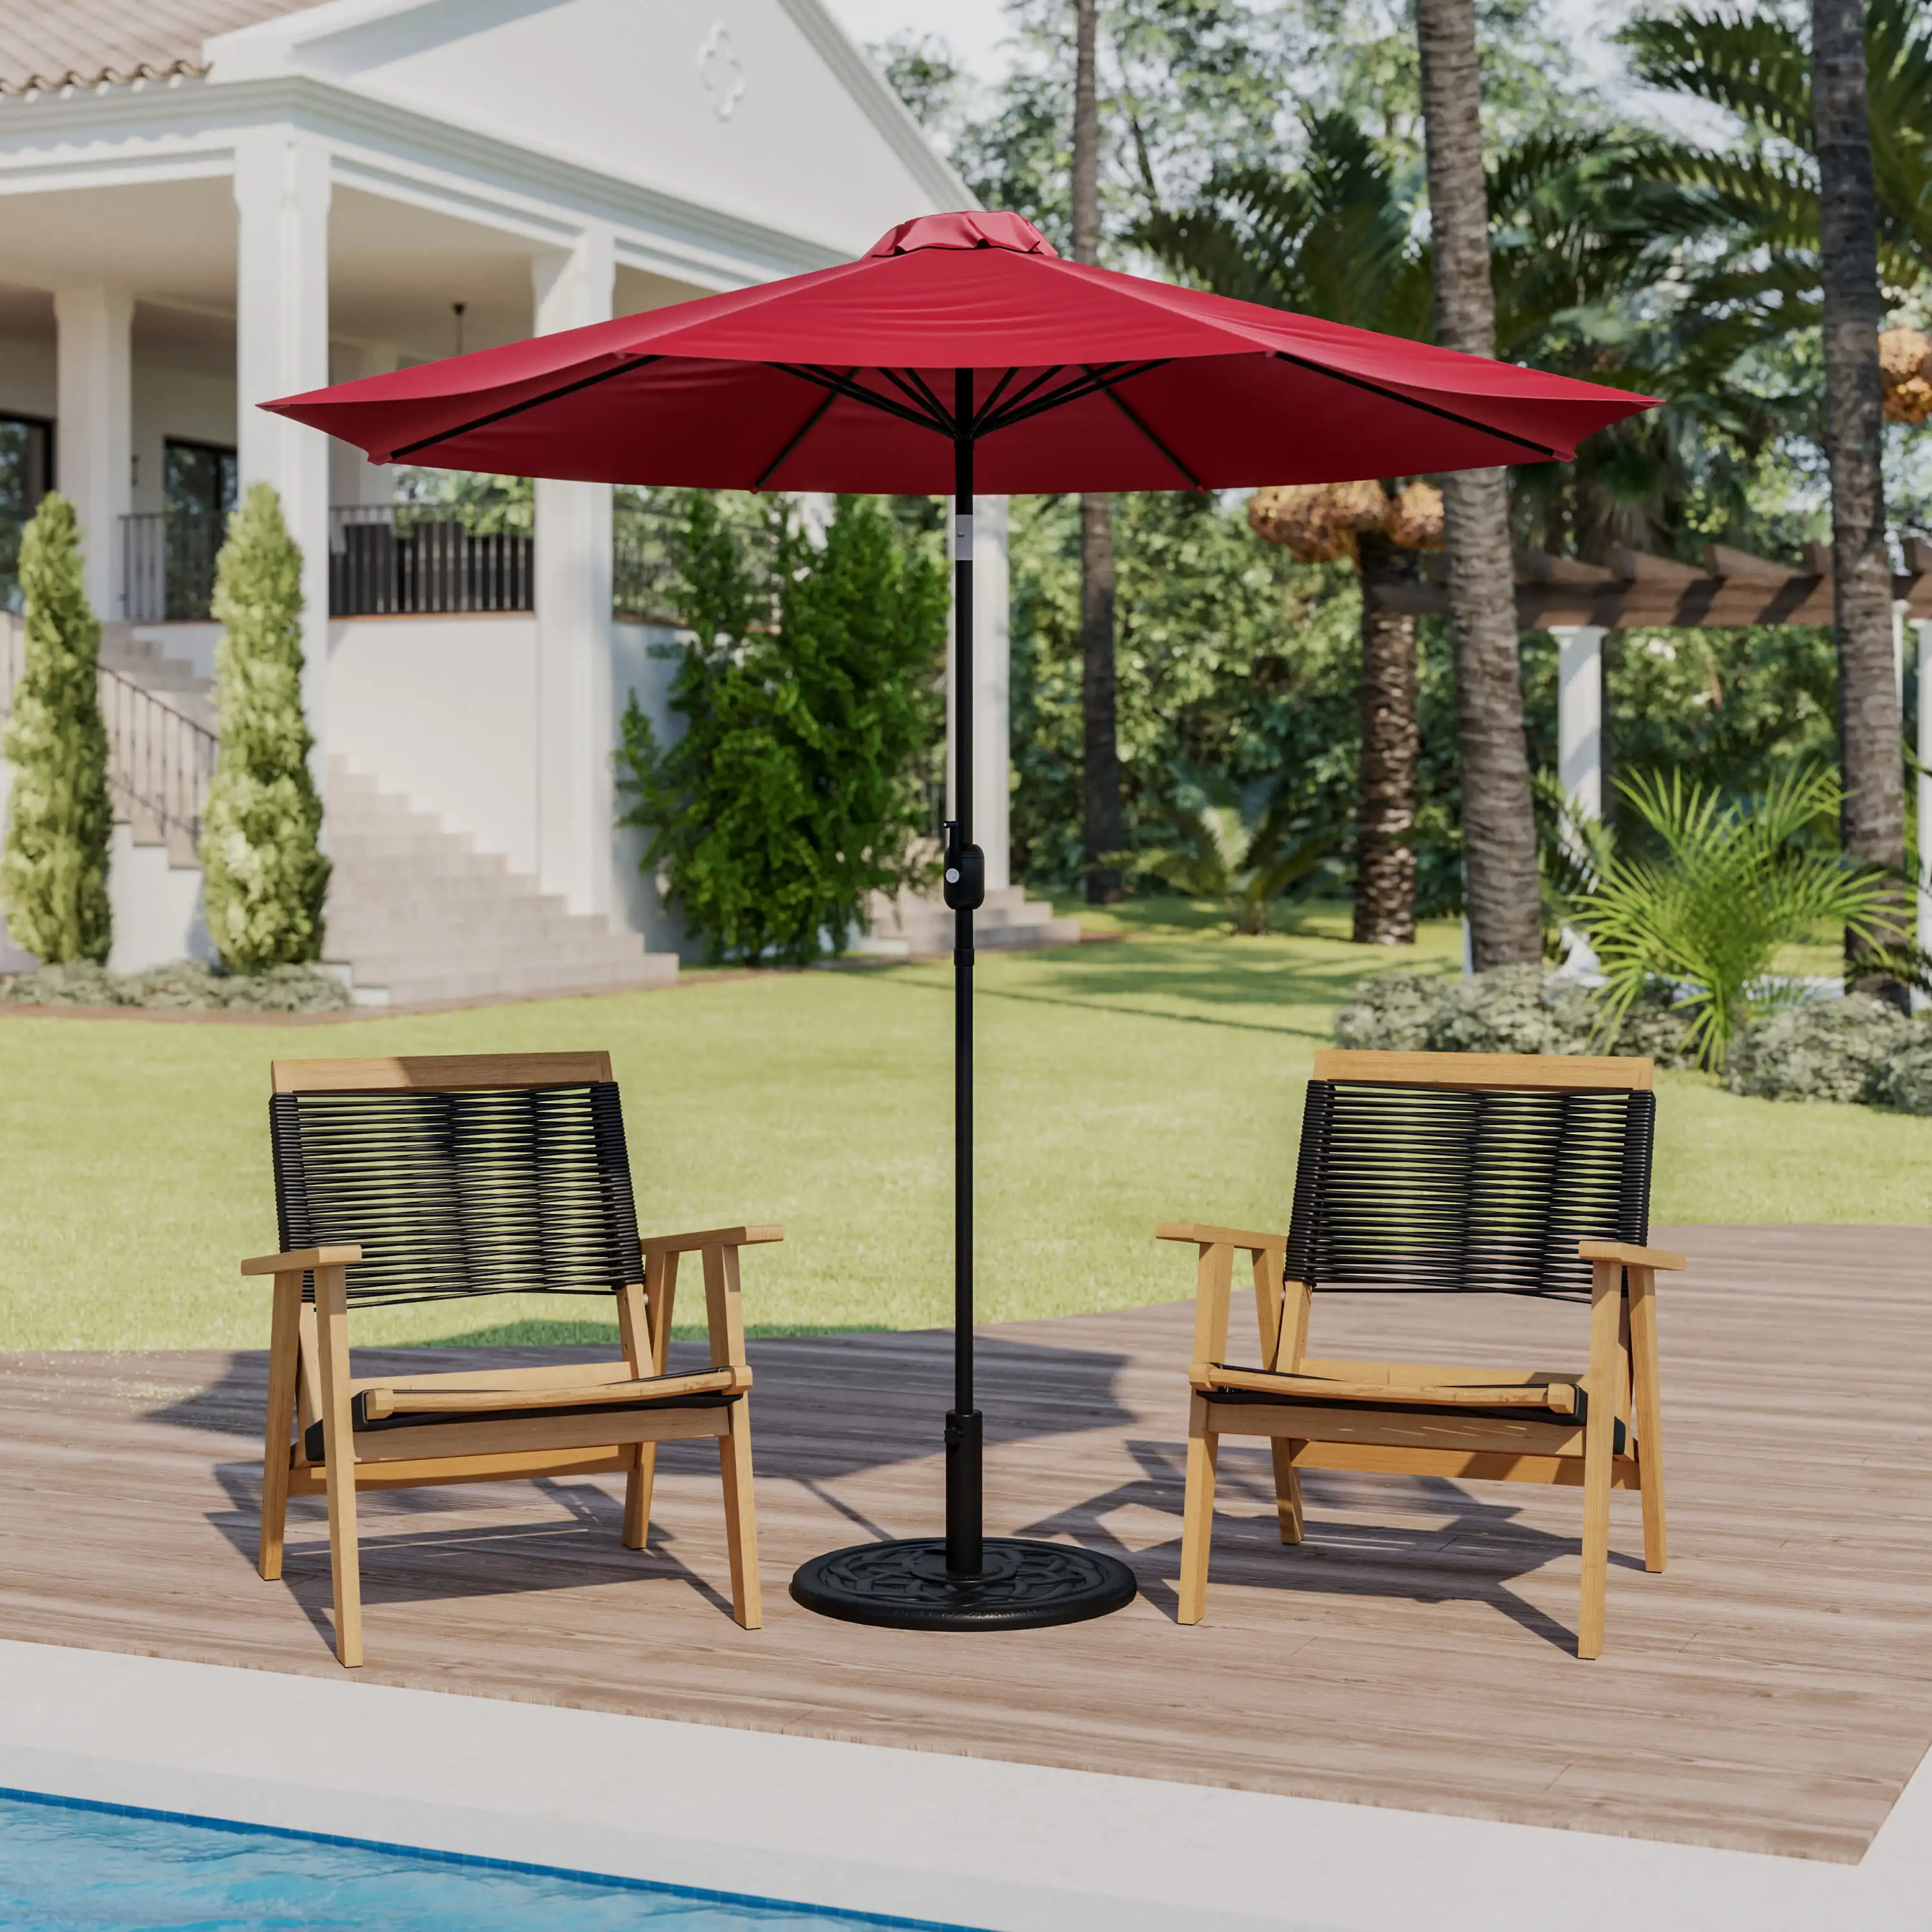 

Flash Furniture Kona Red 9 FT Round Umbrella with Crank and Tilt Function and Standing Umbrella Base